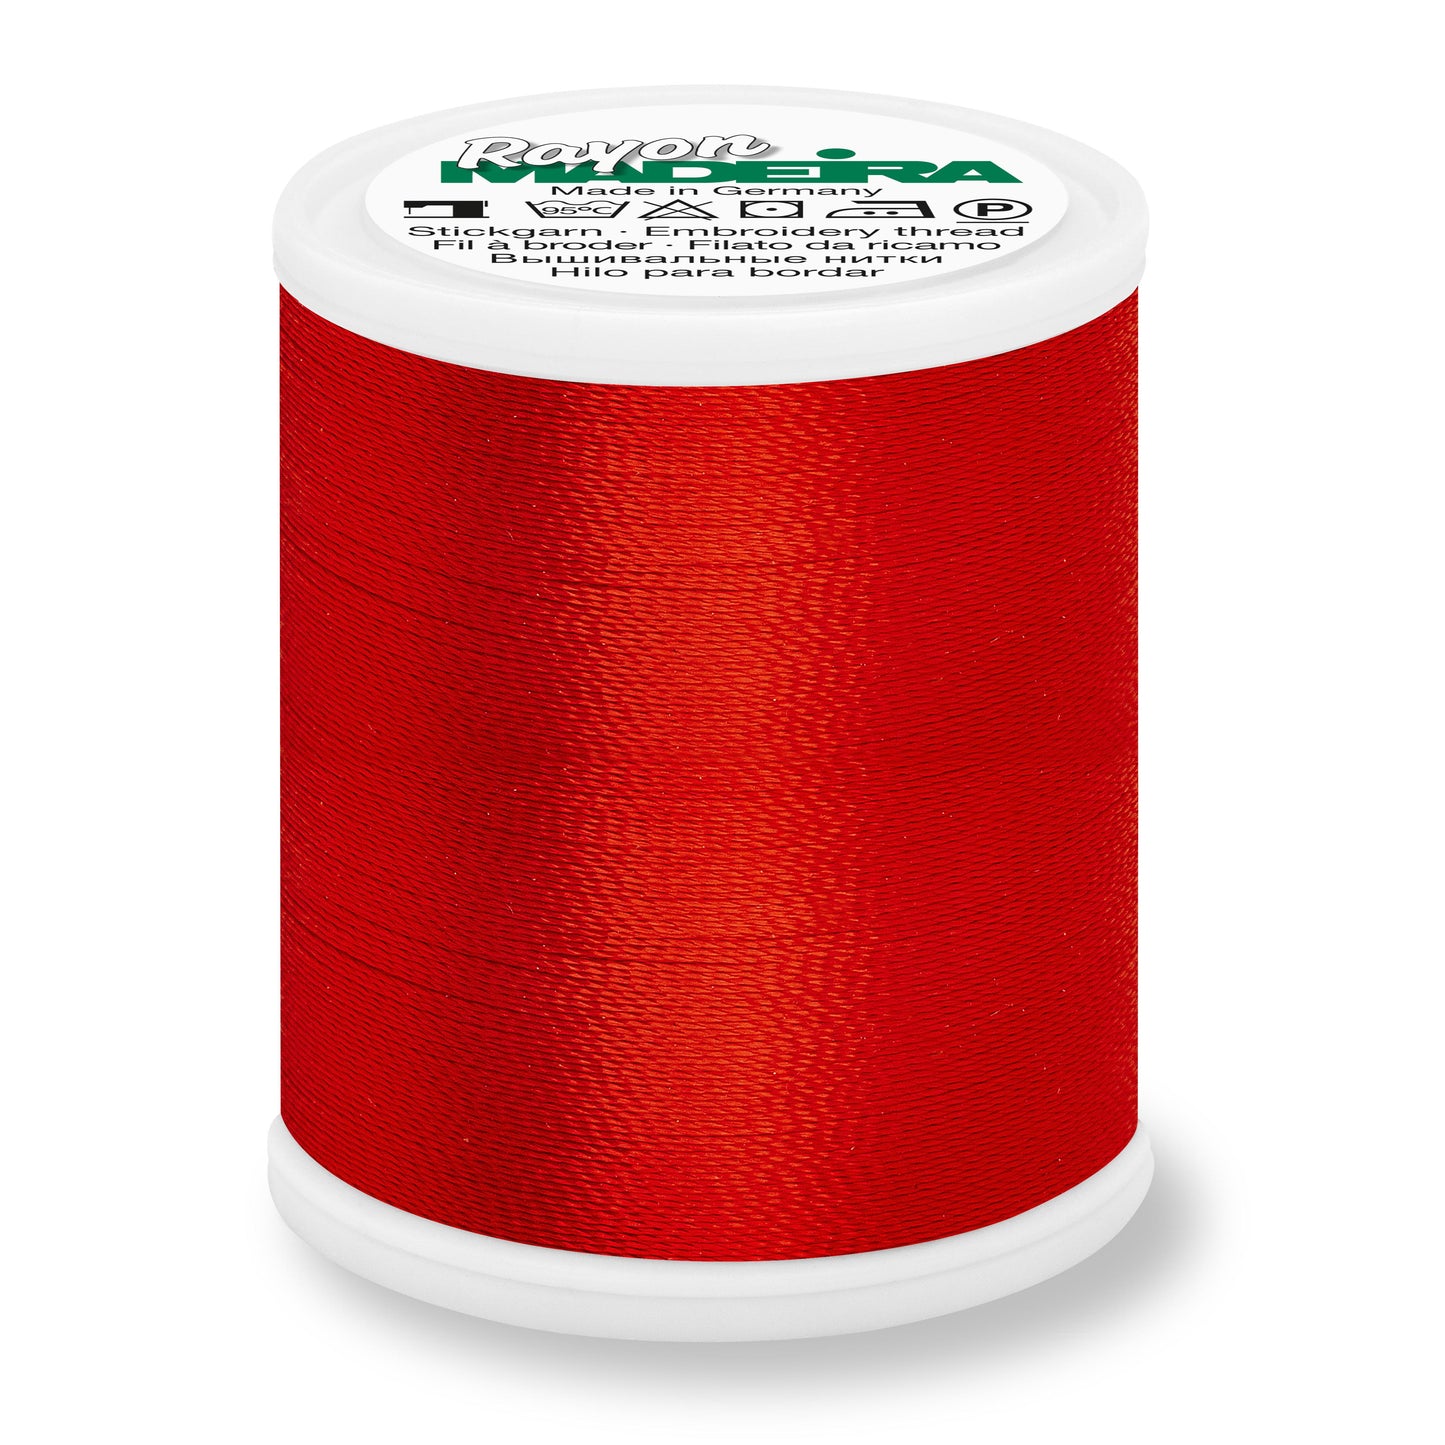 Madeira - Rayon No.40, Col 1039 - 1,000m red embroidery thread 